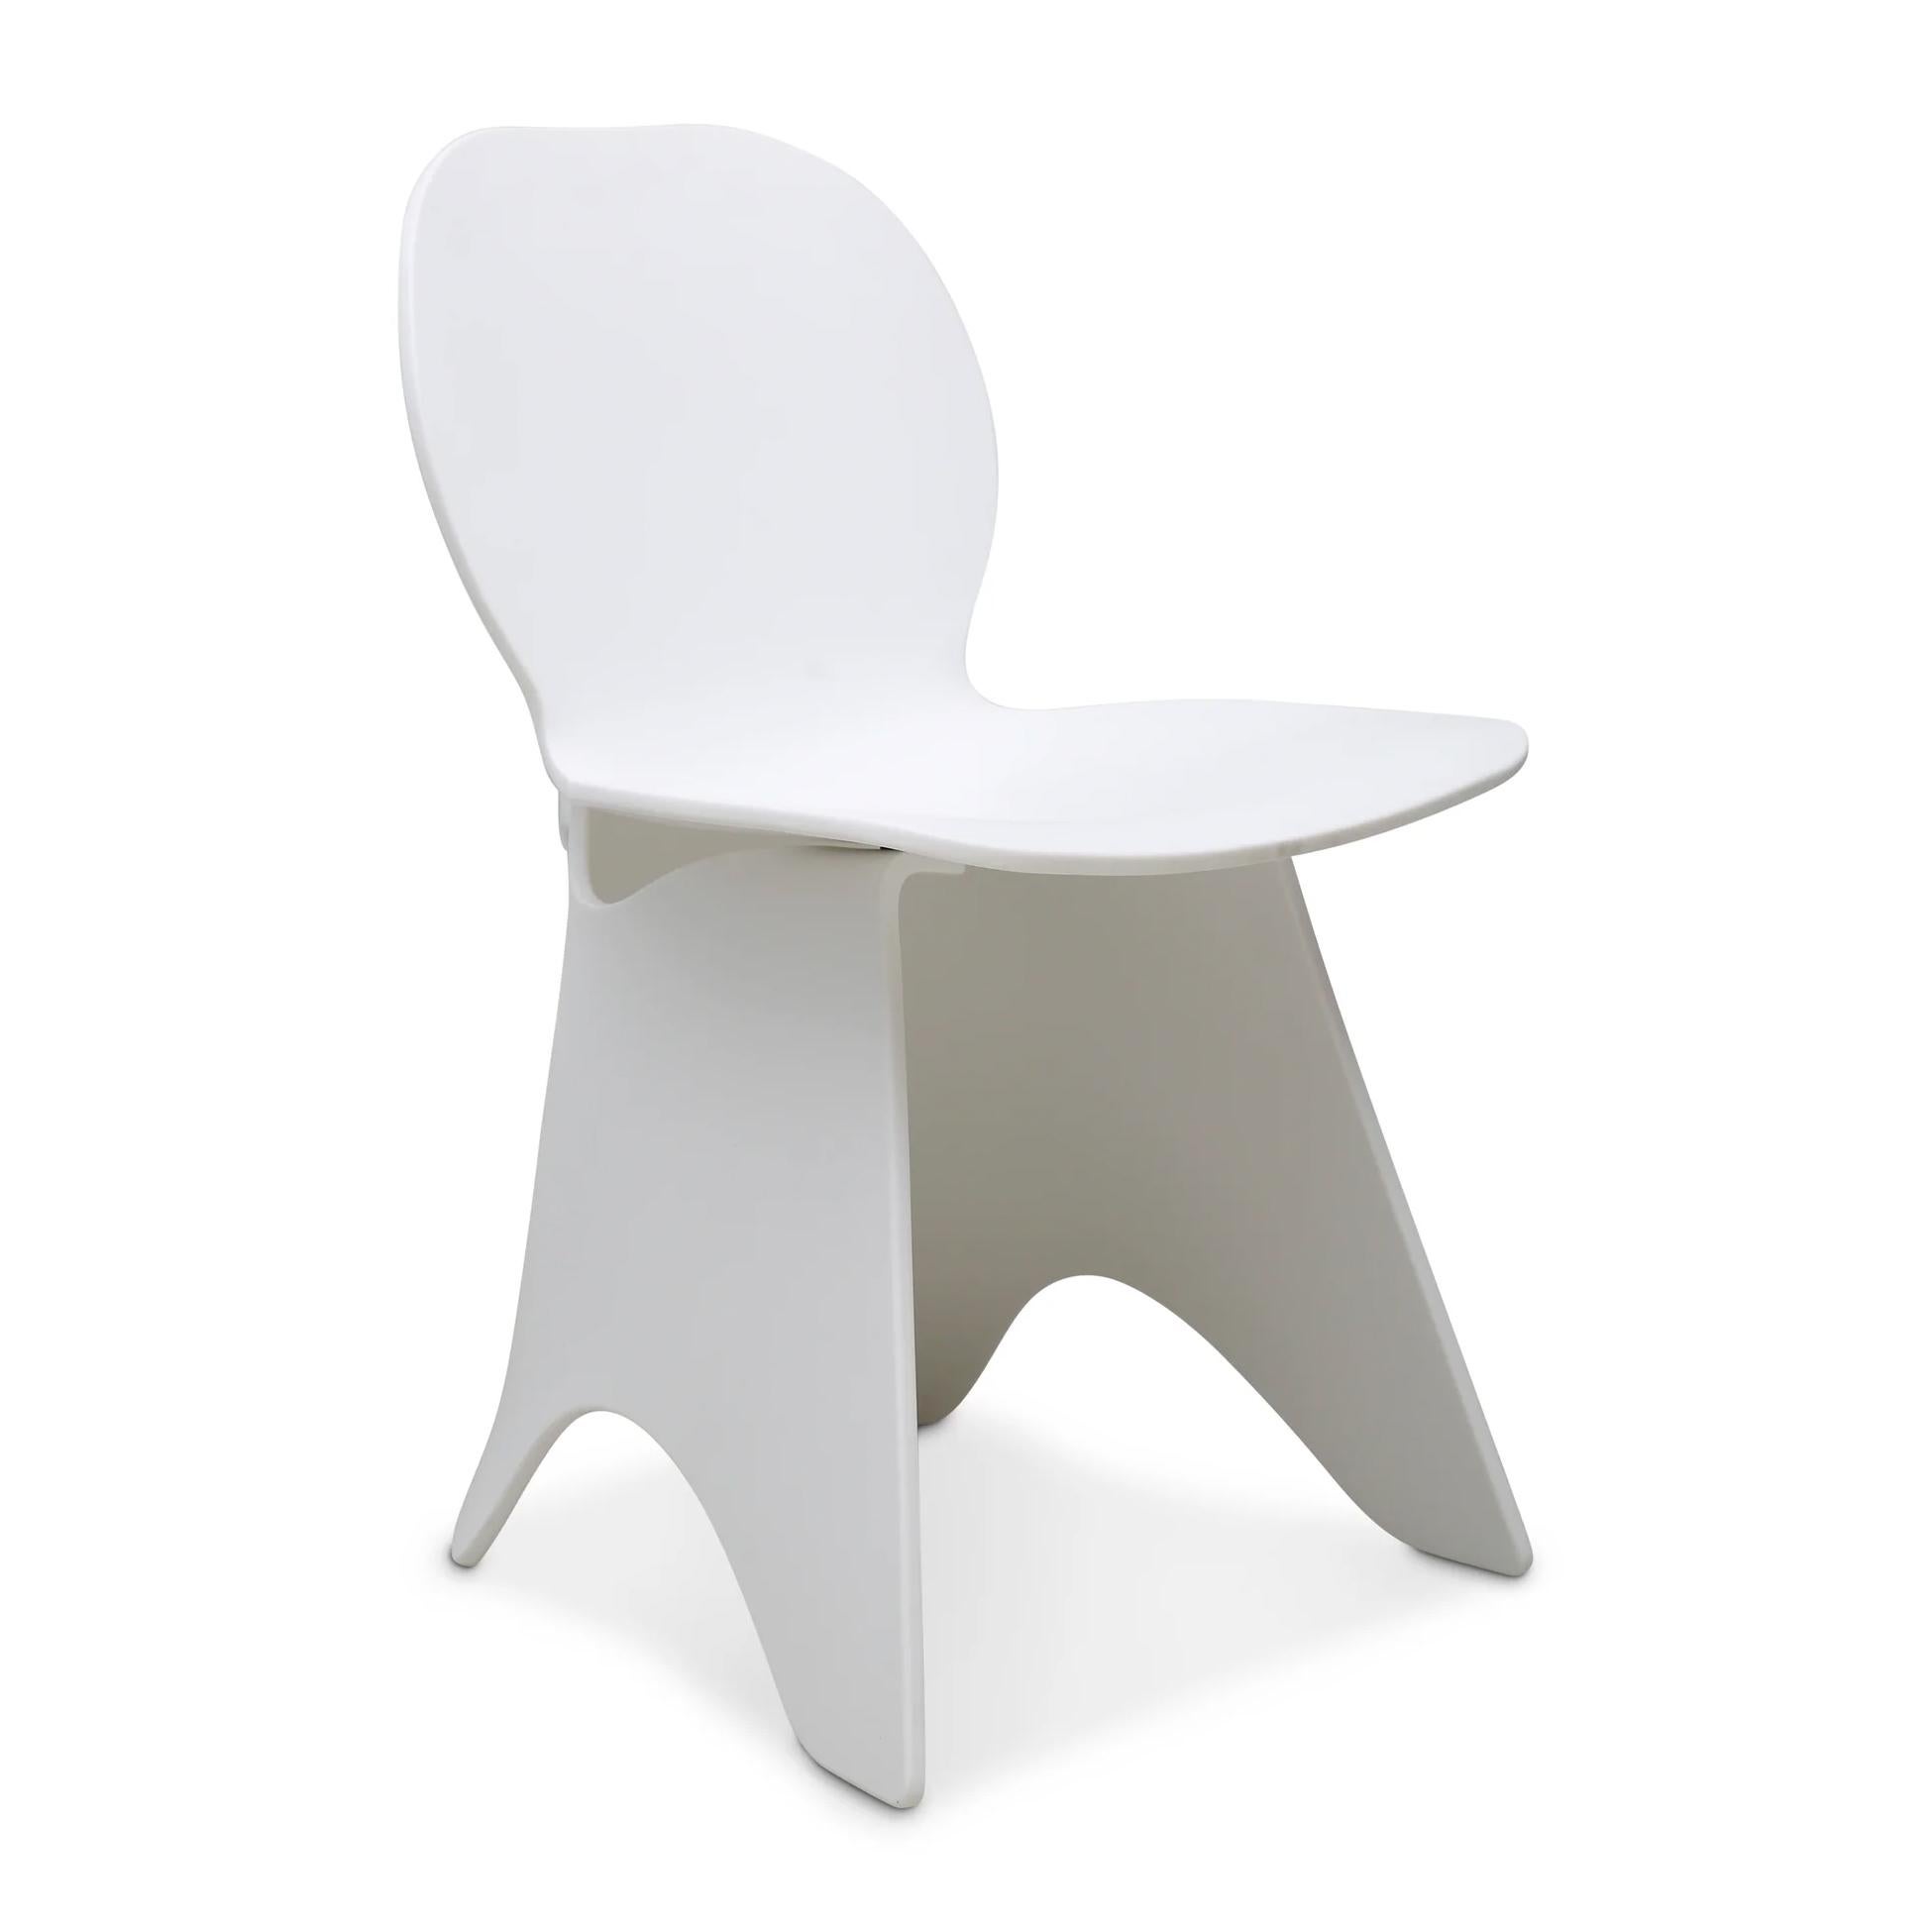 Flo chair is made of thermoformed Corian, a durable countertop material with a stone-like feel. The folds and curves create a structural base and comfortable seat, giving the piece an engaging, sculptural quality. This piece is suitable for interior